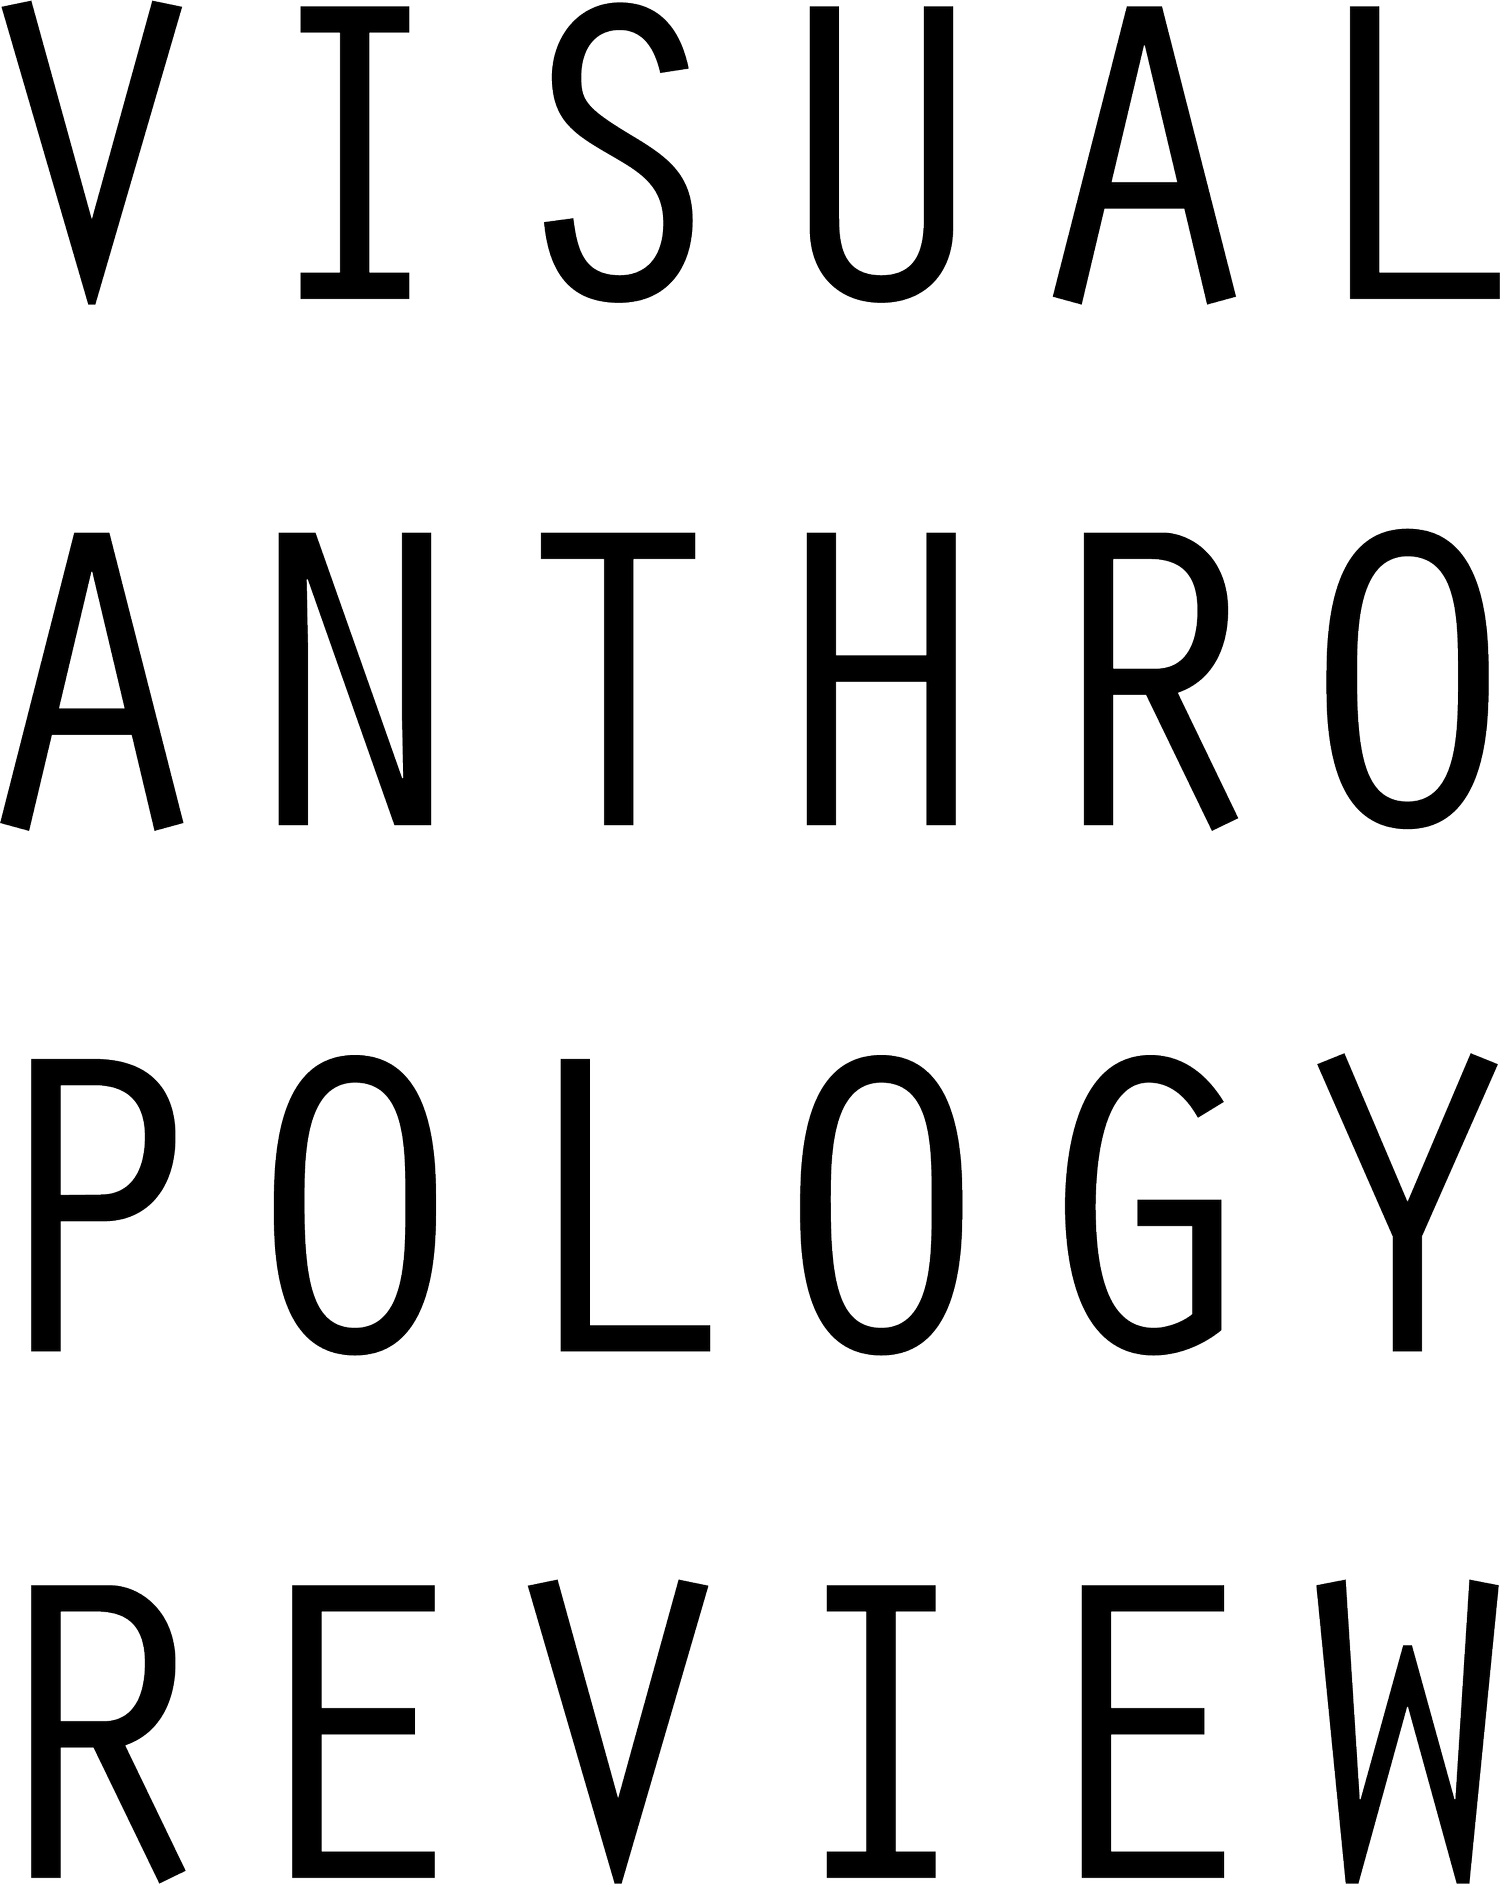 Visual Anthropology Review